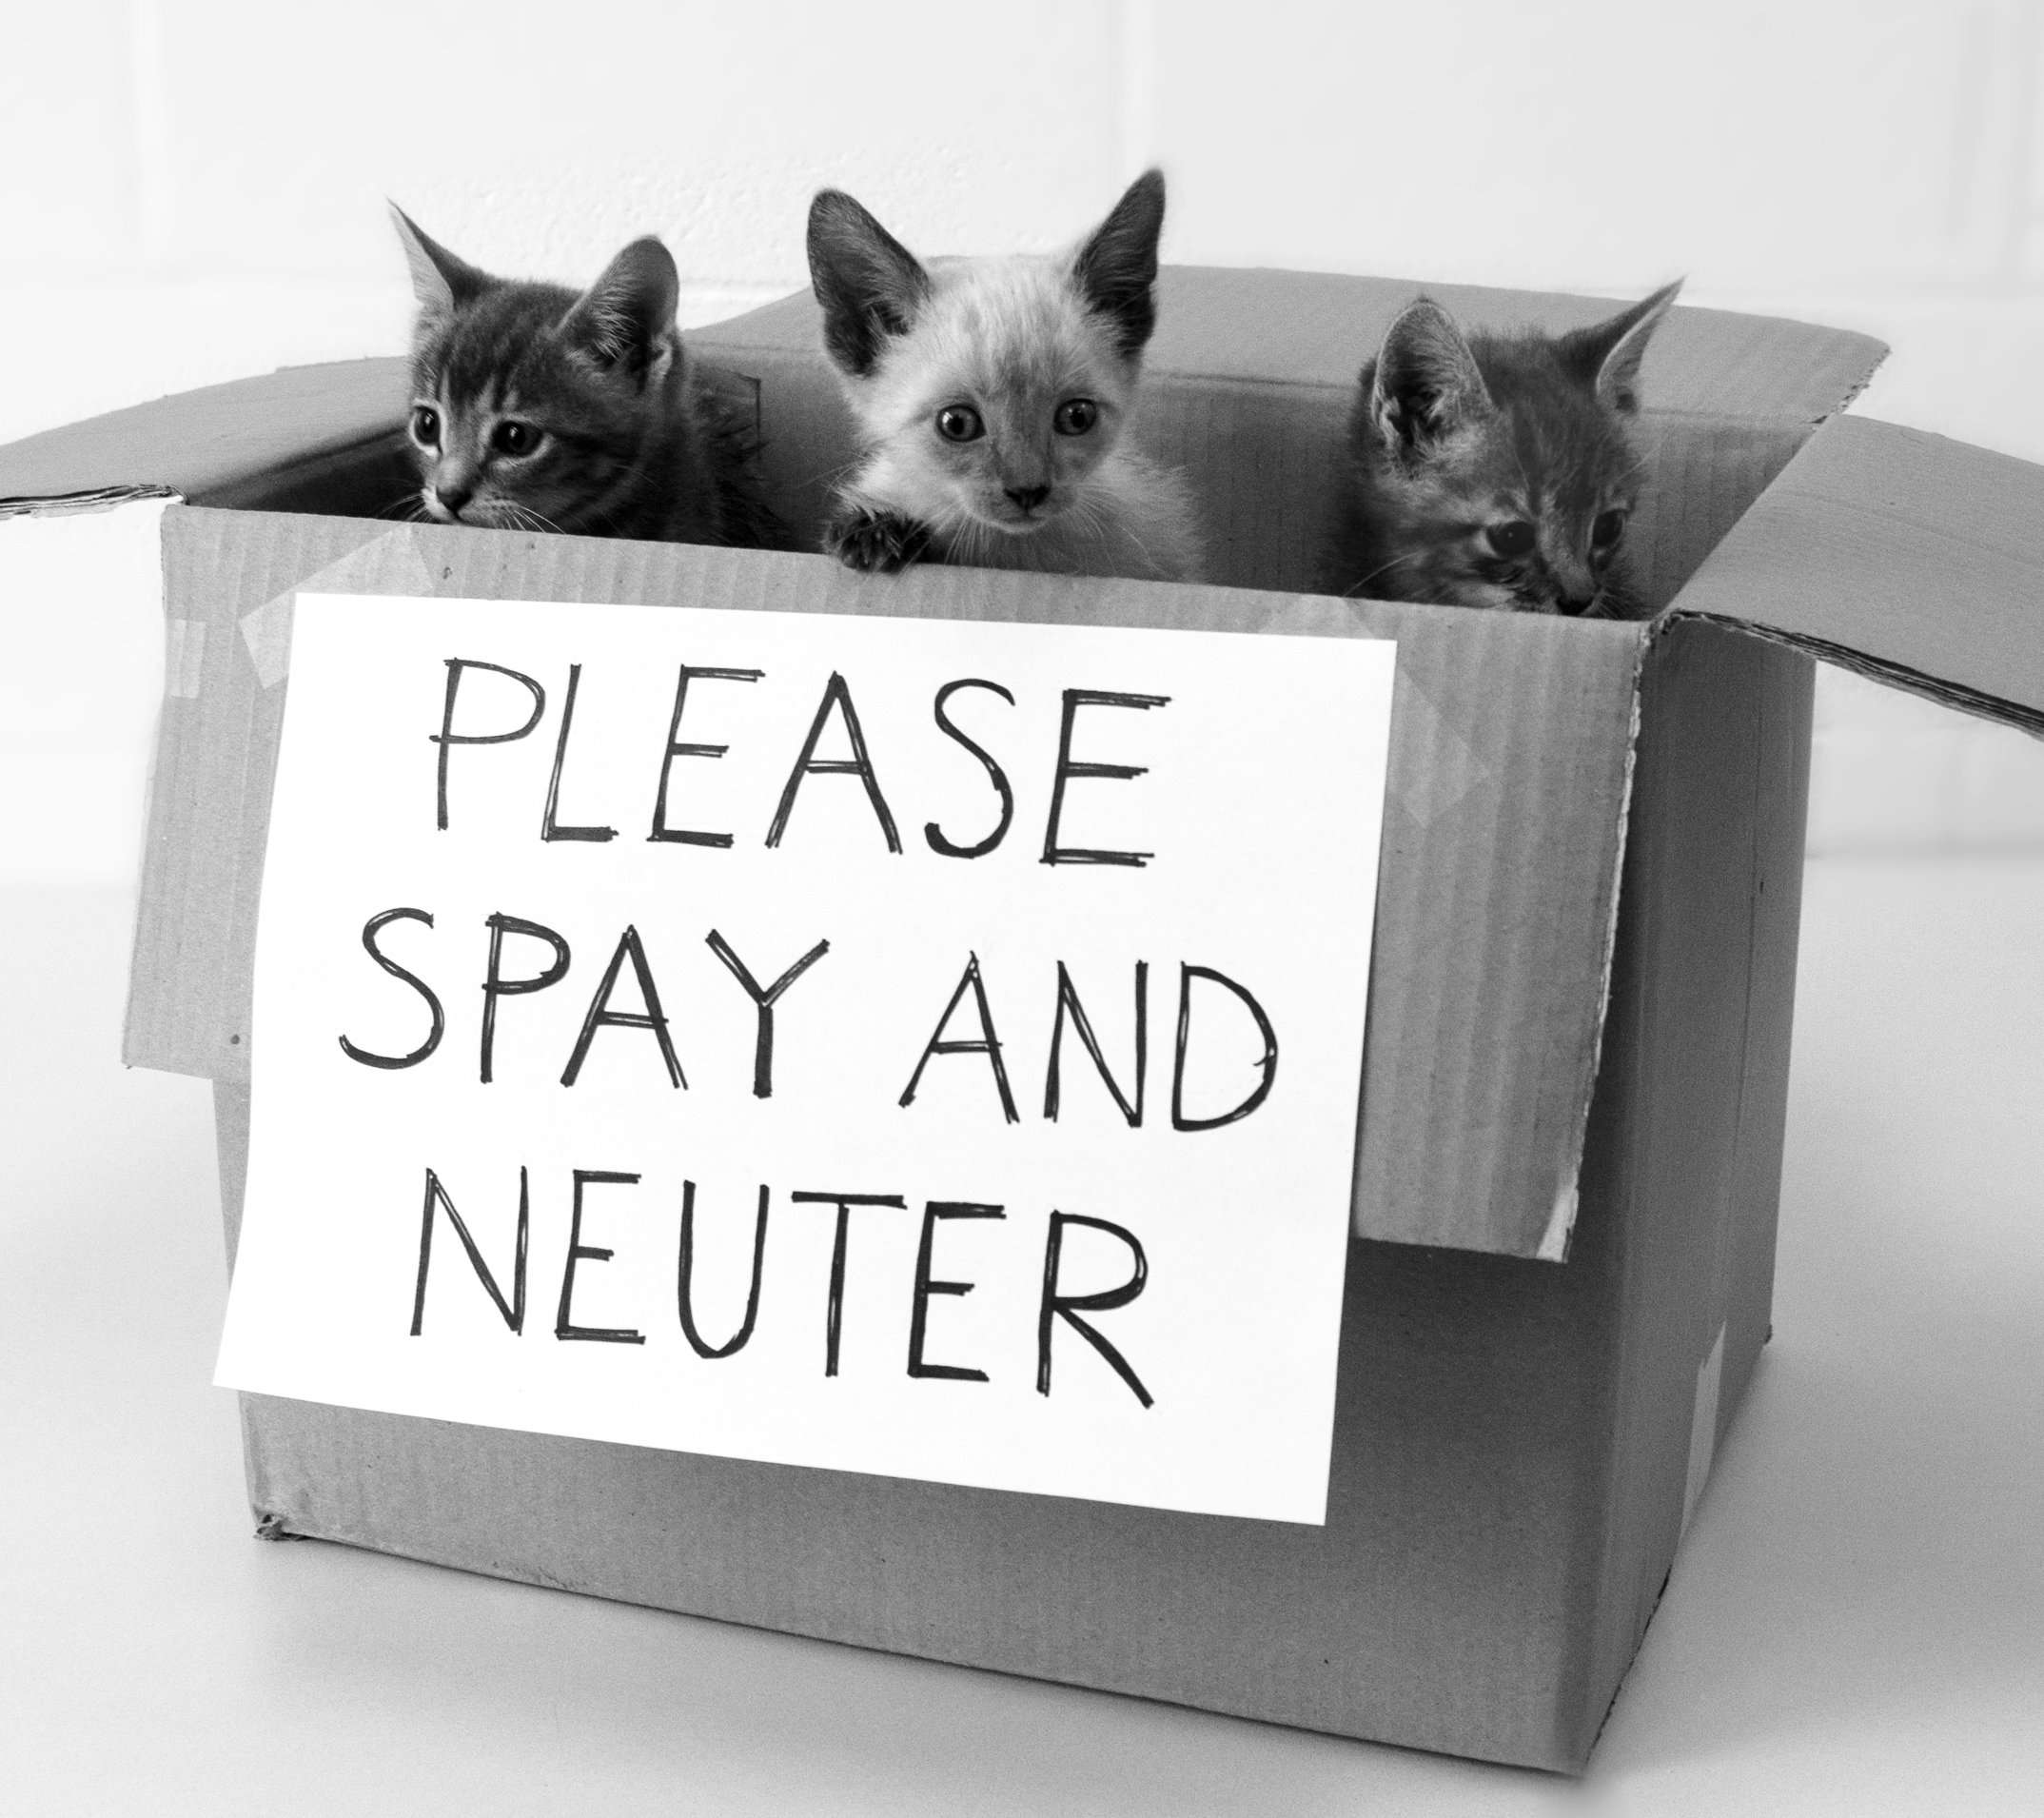 Where Can I Get My Cat Neutered For Free? Click To Know